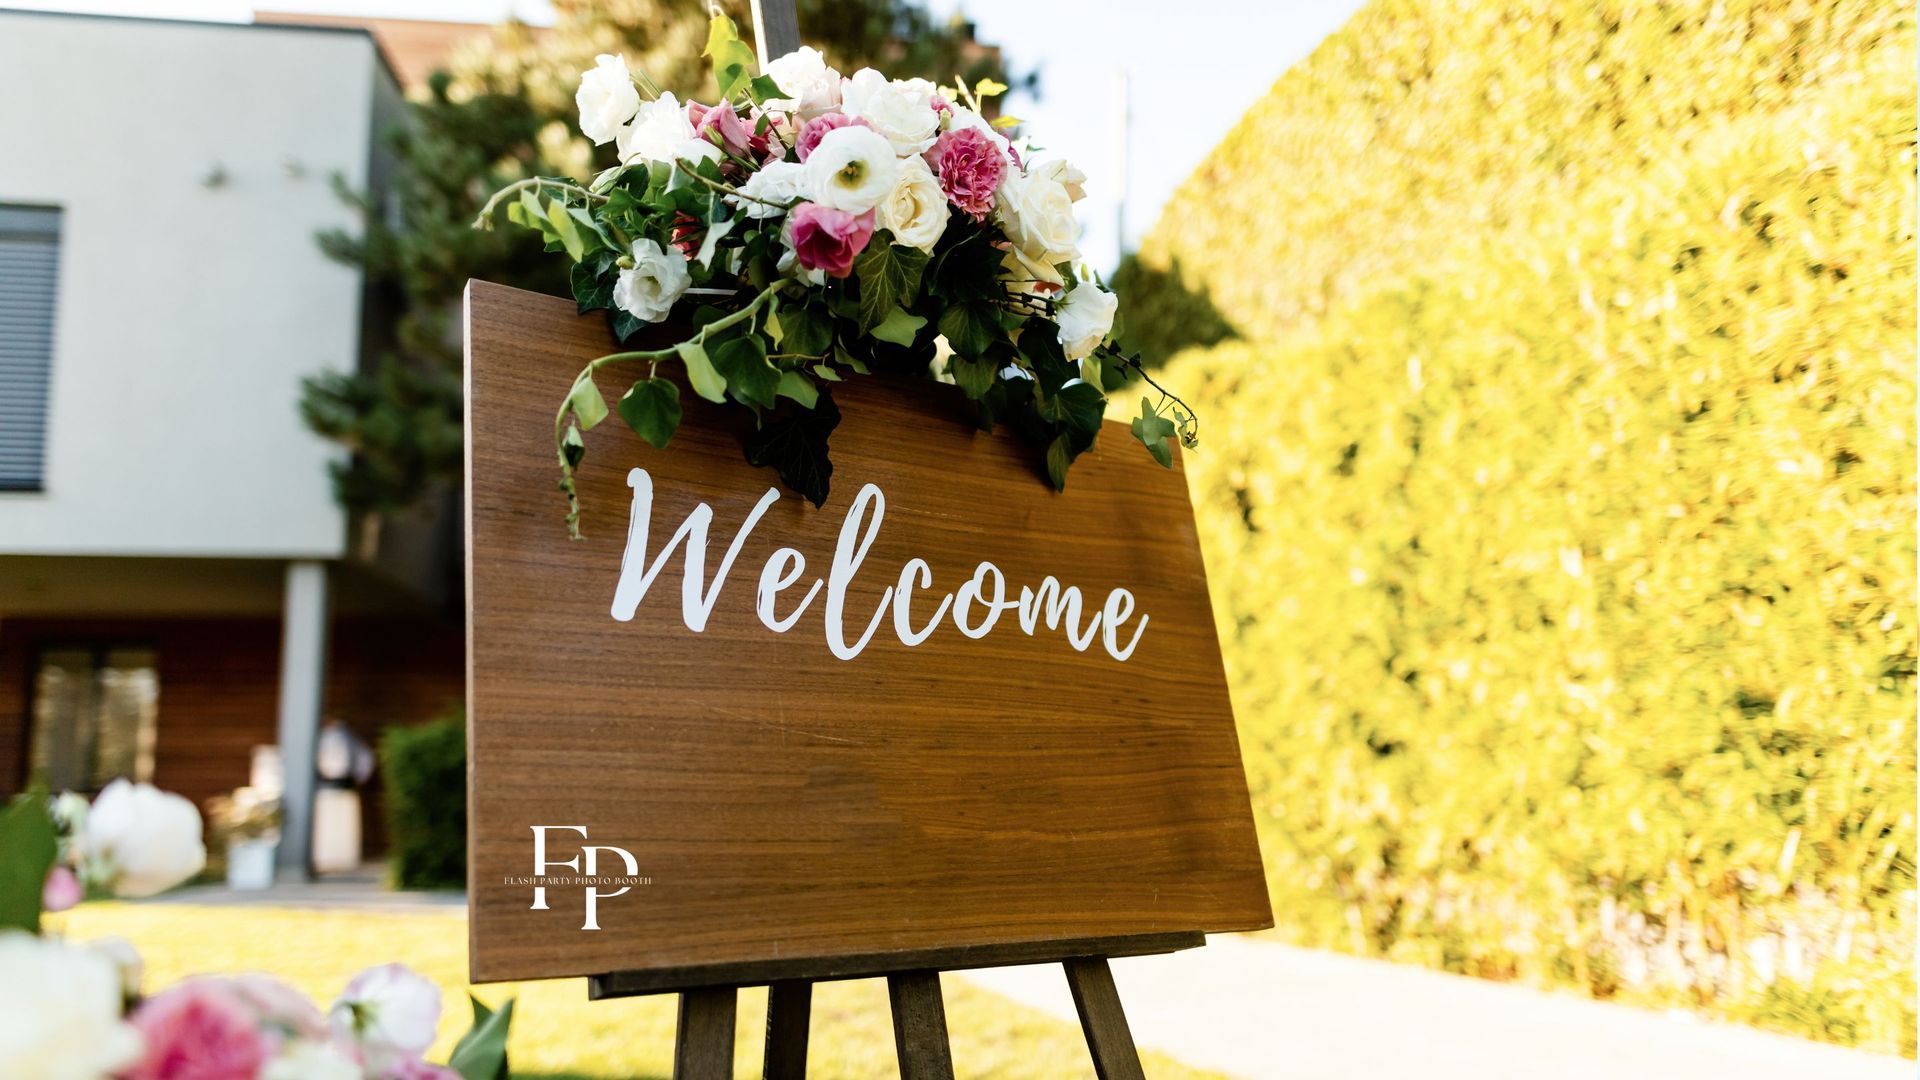 A welcome signage at the wedding venue in Manor for the arriving guests